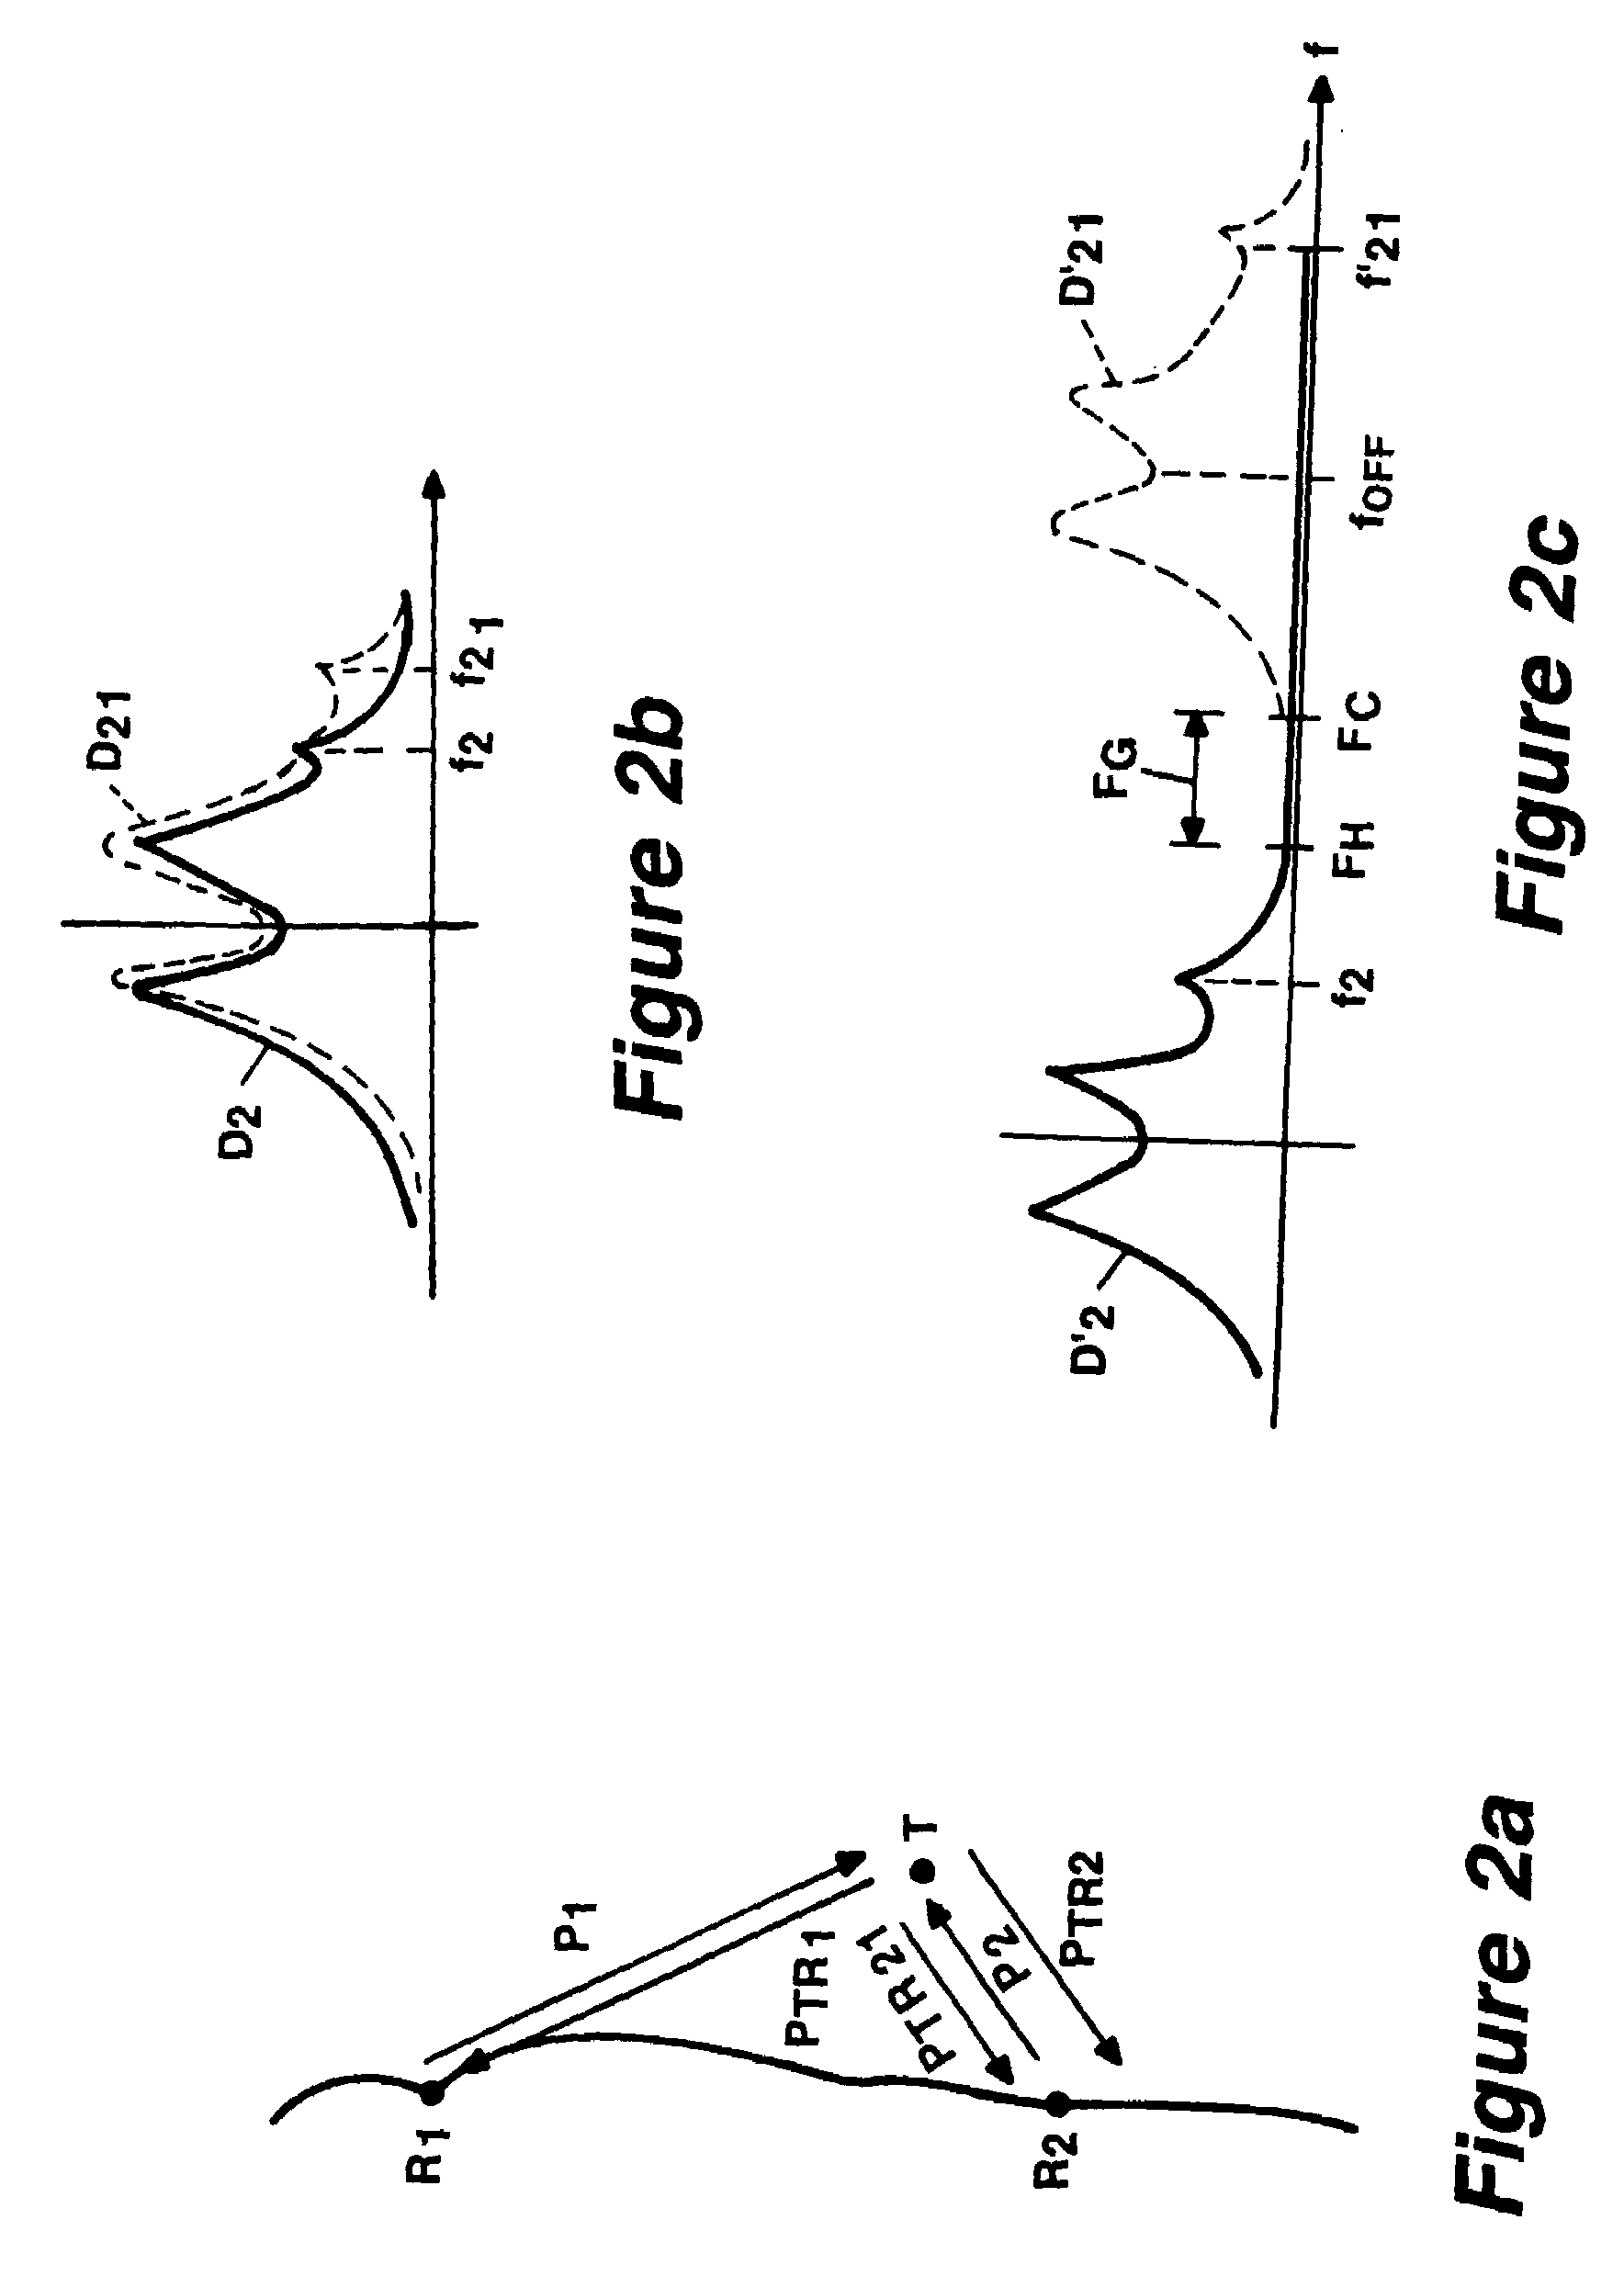 System and method for concurrent operation of multiple radar or active sonar systems on a common frequency